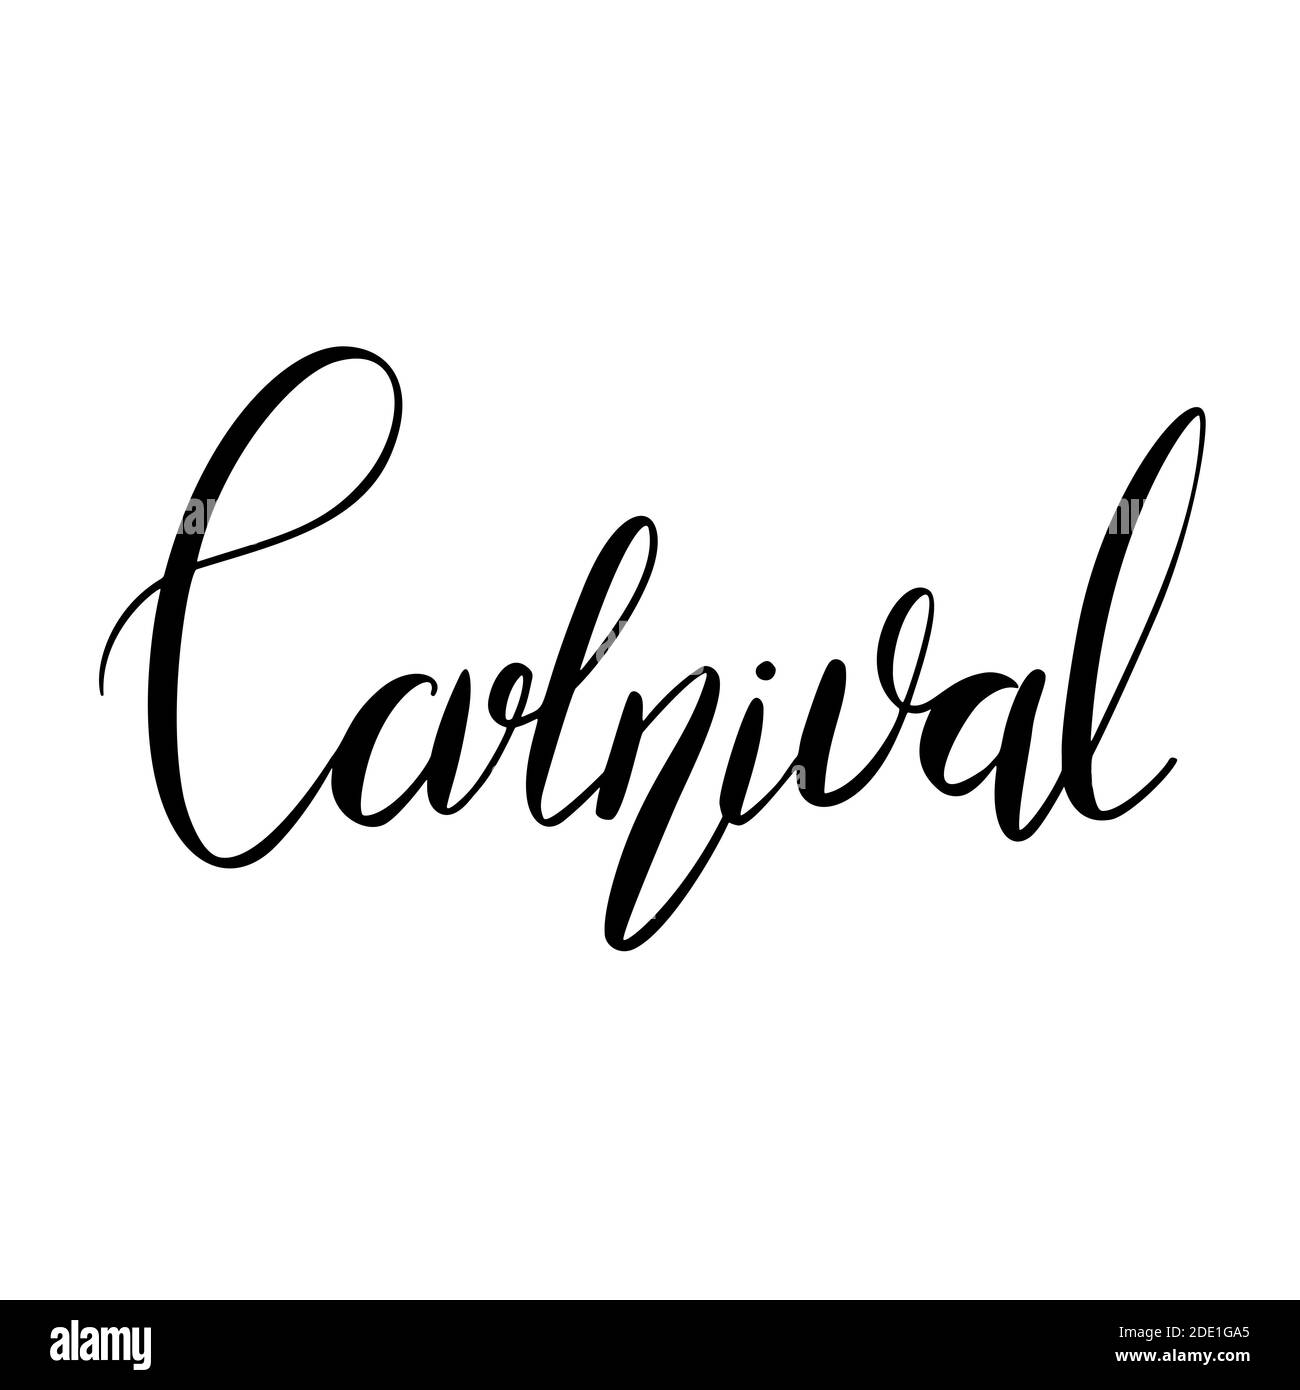 Carnival. Black lettering brush isolated on white background. Festive print calligraphic quote. Vector element for greeting cards, banners and your cr Stock Vector